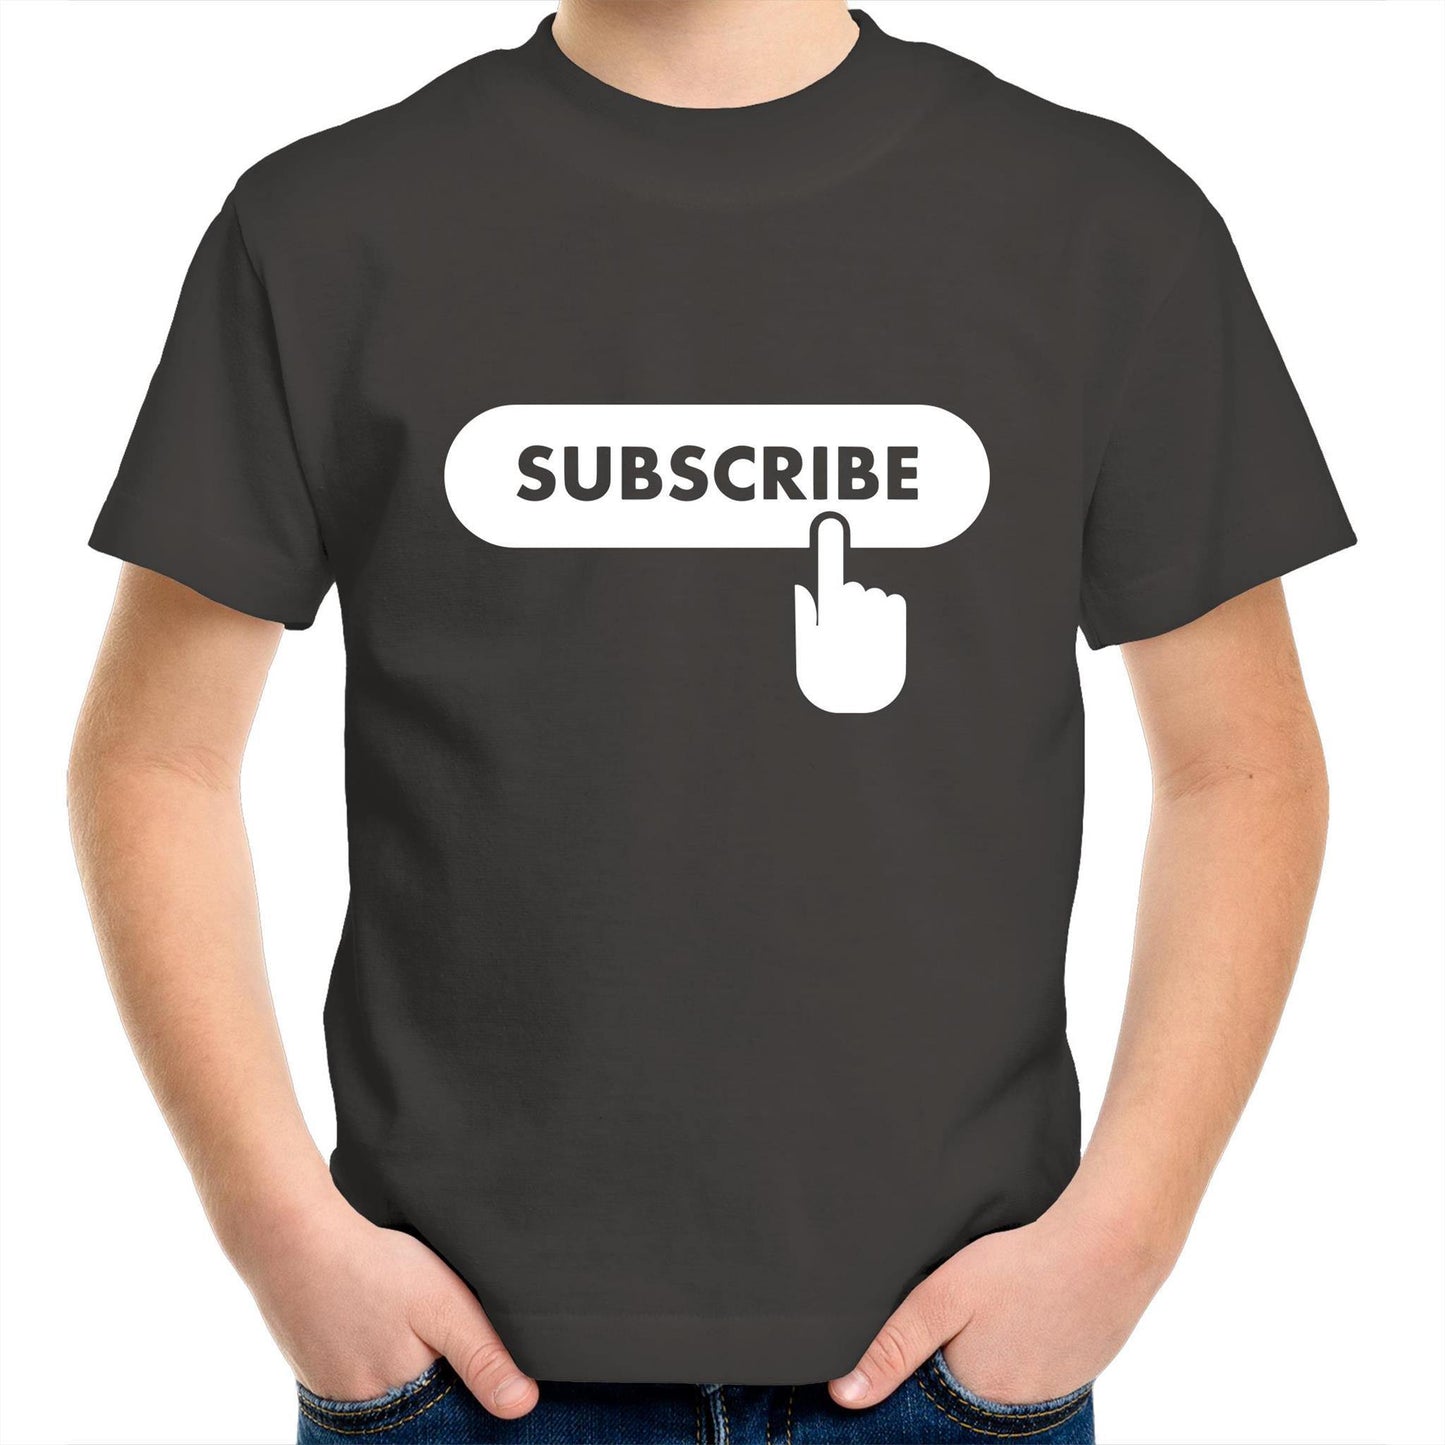 Subscribe - Kids Youth Crew T-Shirt Charcoal Kids Youth T-shirt Funny